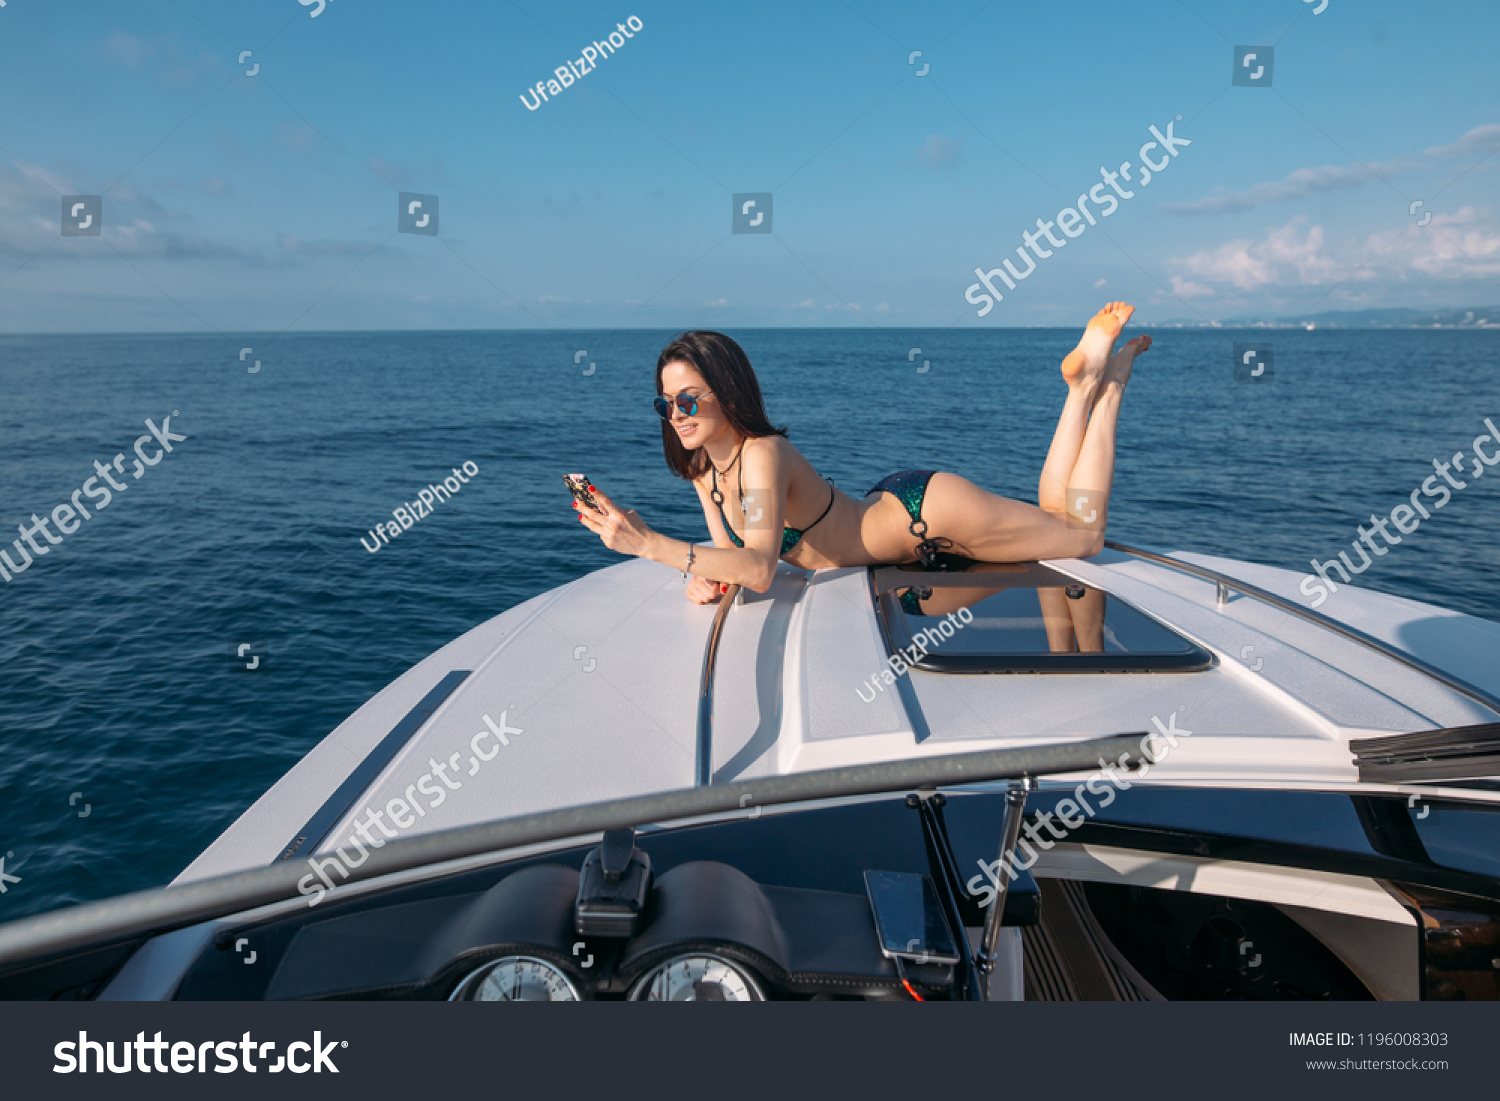 Vacation and technology. Pretty young woman in swimsuit chatting with a friend while taking sun bathes on a bow of a luxury sailboat. #1196008303